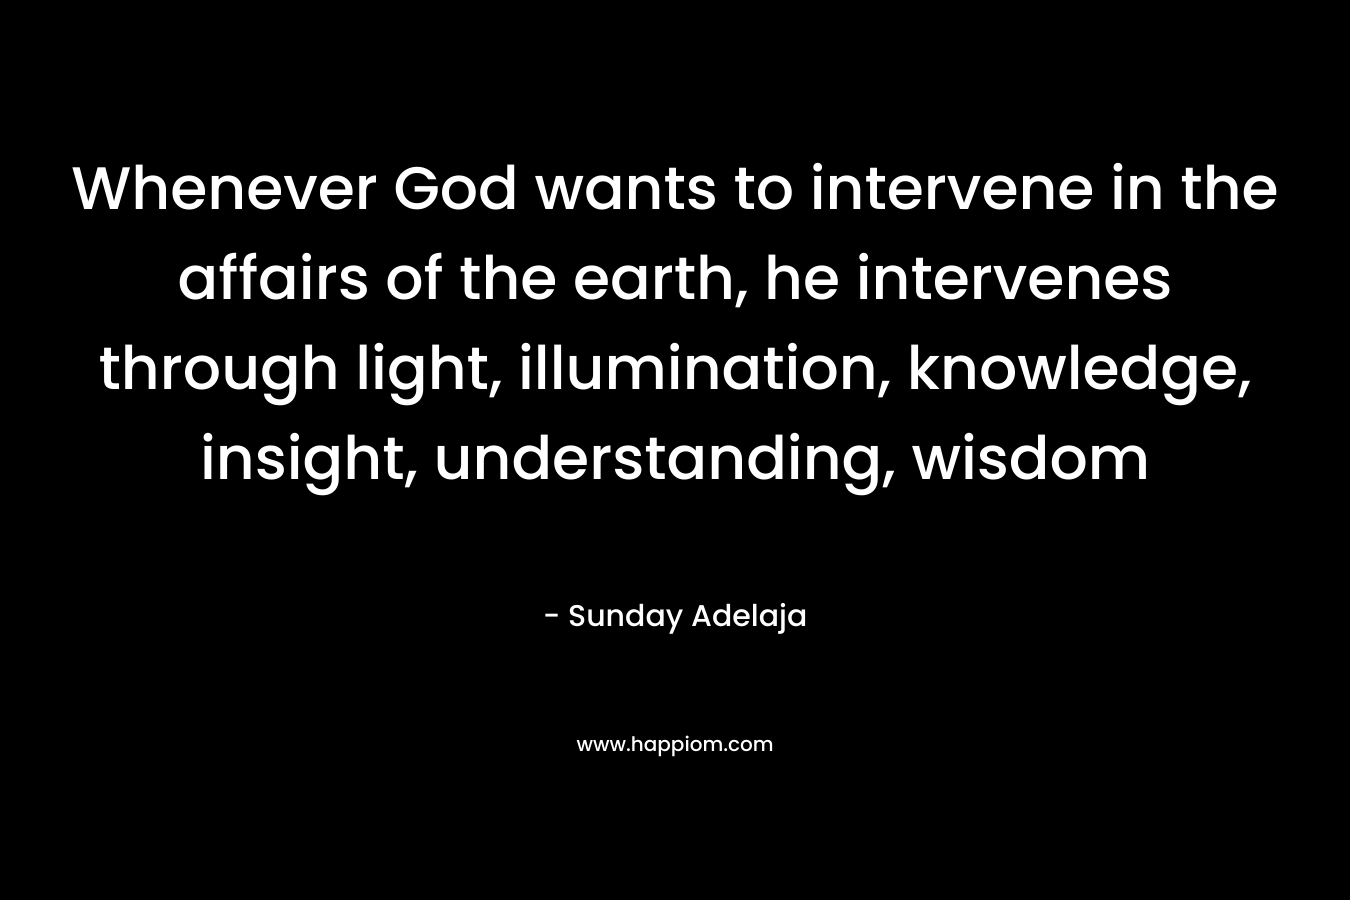 Whenever God wants to intervene in the affairs of the earth, he intervenes through light, illumination, knowledge, insight, understanding, wisdom